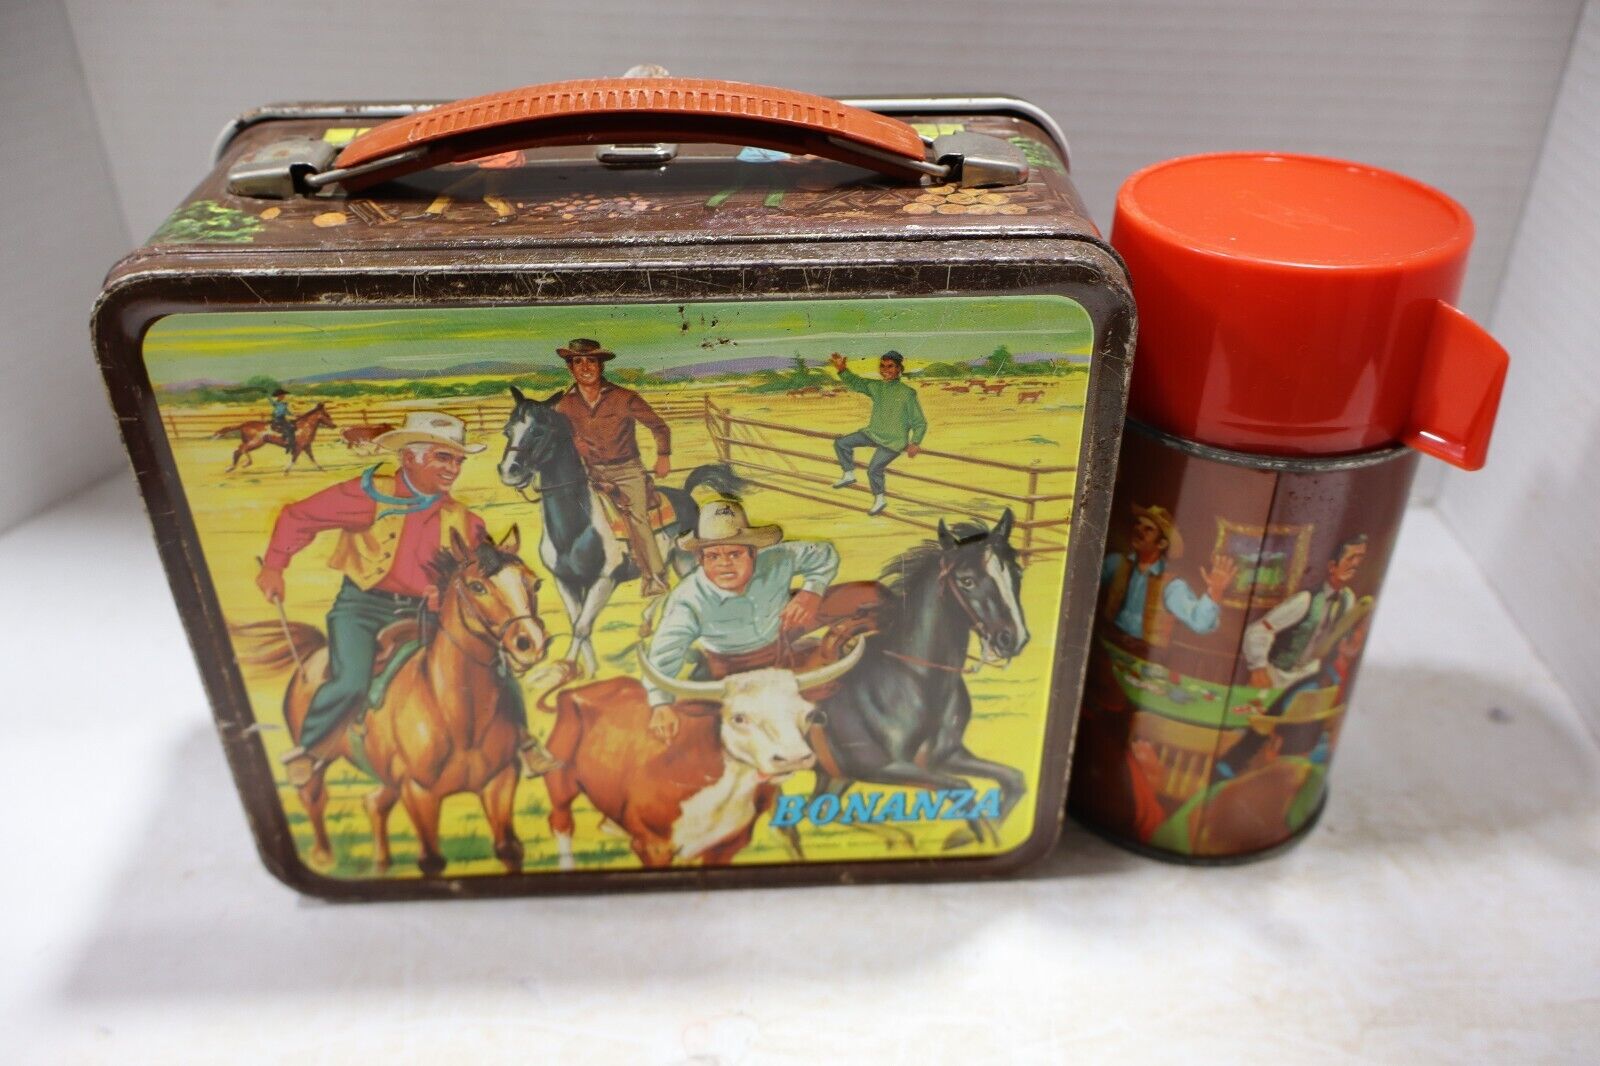 Vintage 1965 Bonanza TV Show Lunchbox and Thermos #2